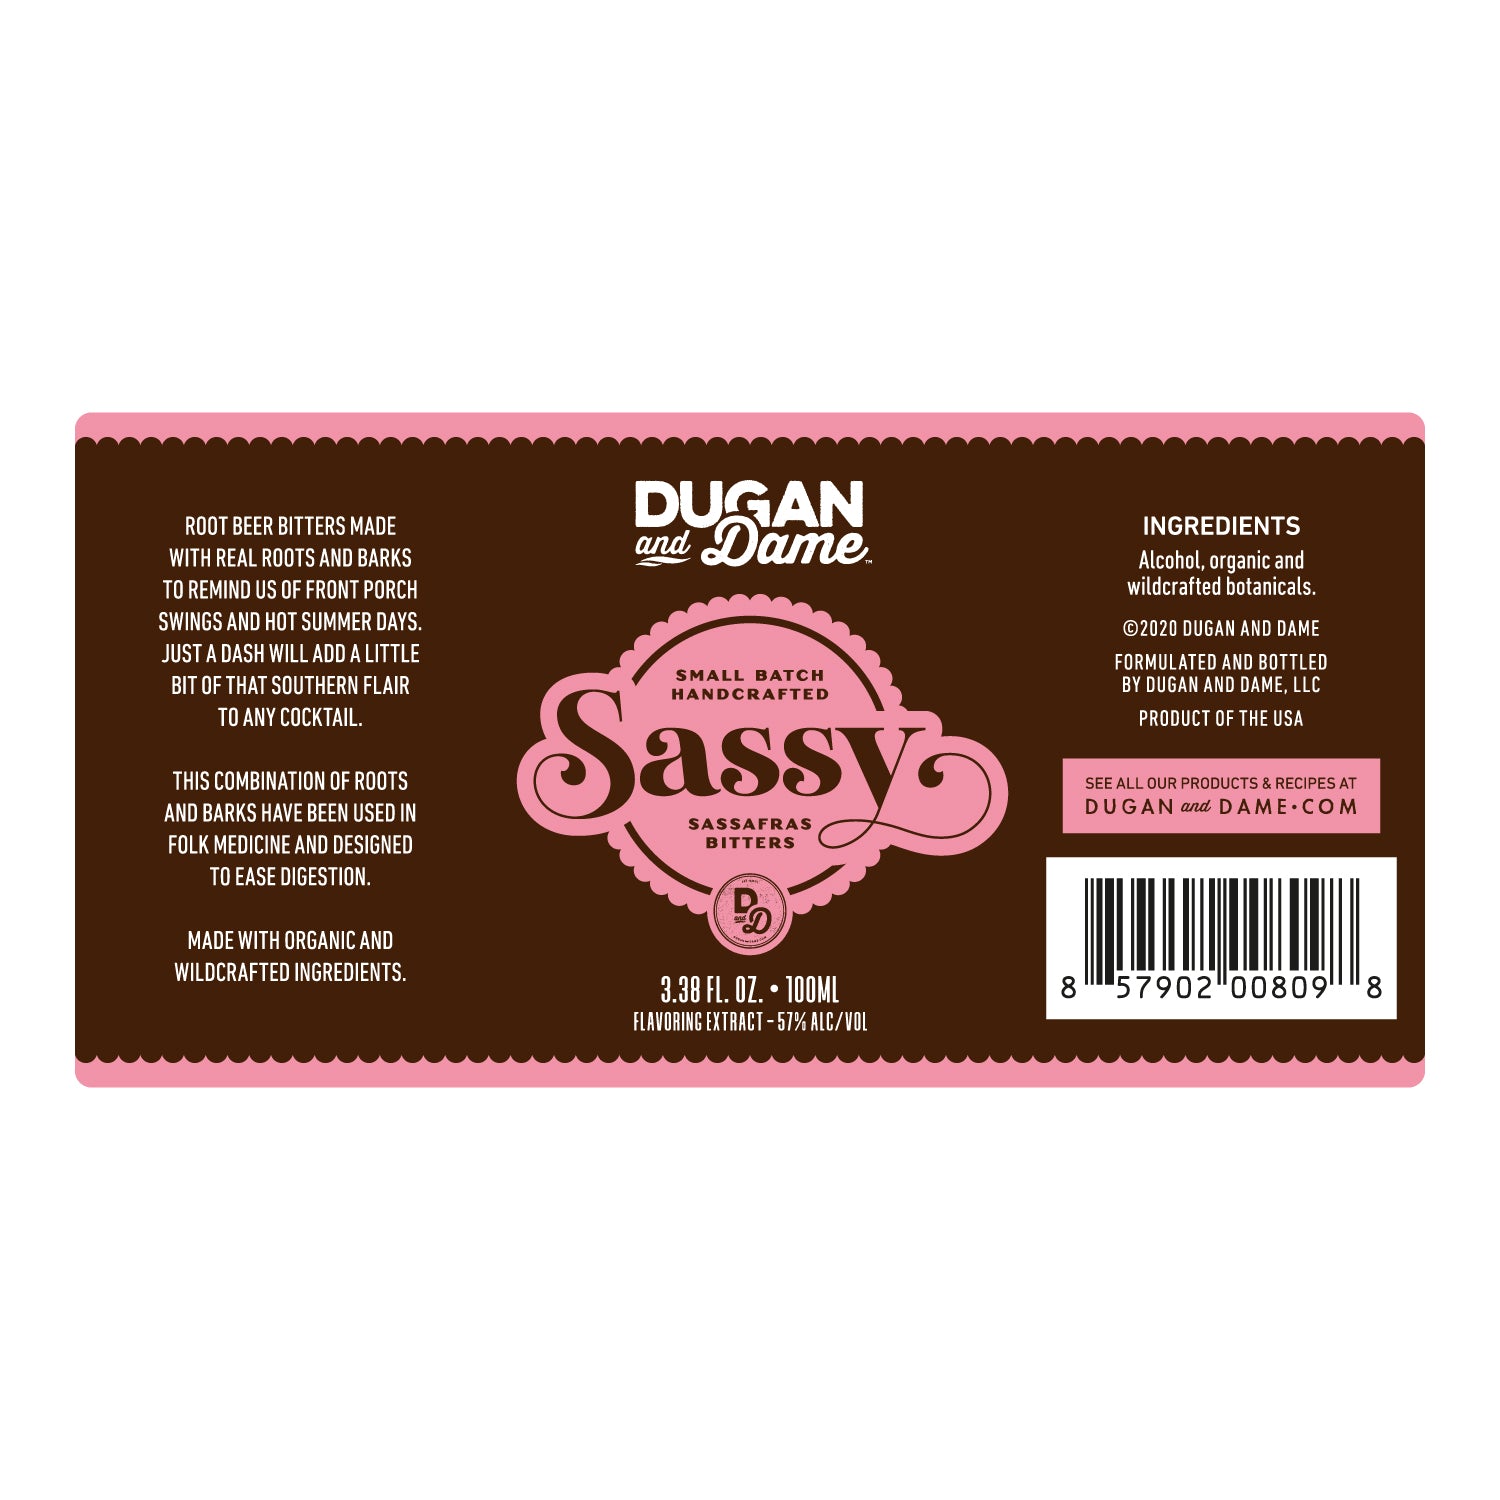 Dugan and Dame Sassy Cocktail Bitters Label